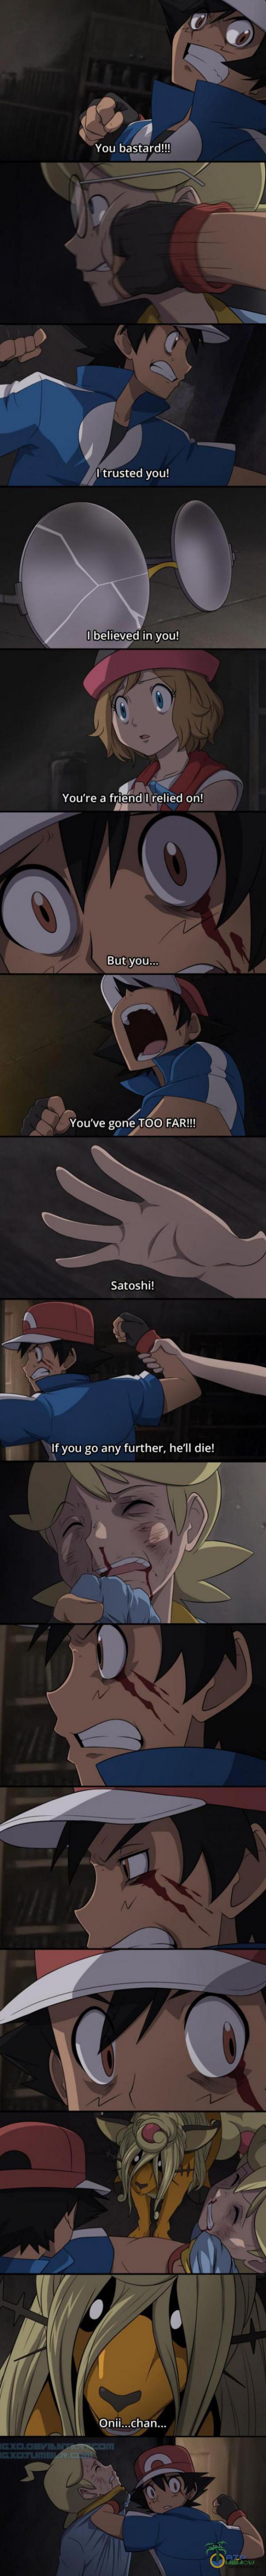 You bastard!!! I trusted you! I believed in you! You re a friend I ŕelied on! But •you ve gone TOO FAR!!! Satoshi! If you go any further, he ll die! Onii:..